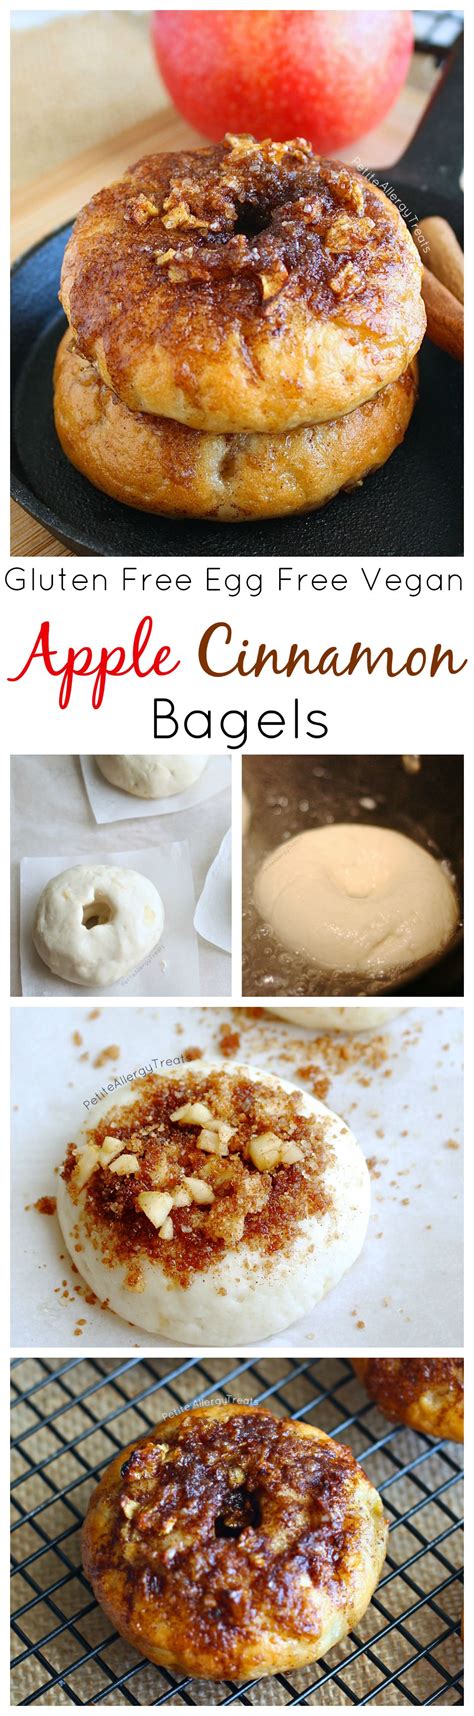 Just what we want a brownie to be: Gluten Free Cinnamon Apple Bagels (Vegan Egg Free ...